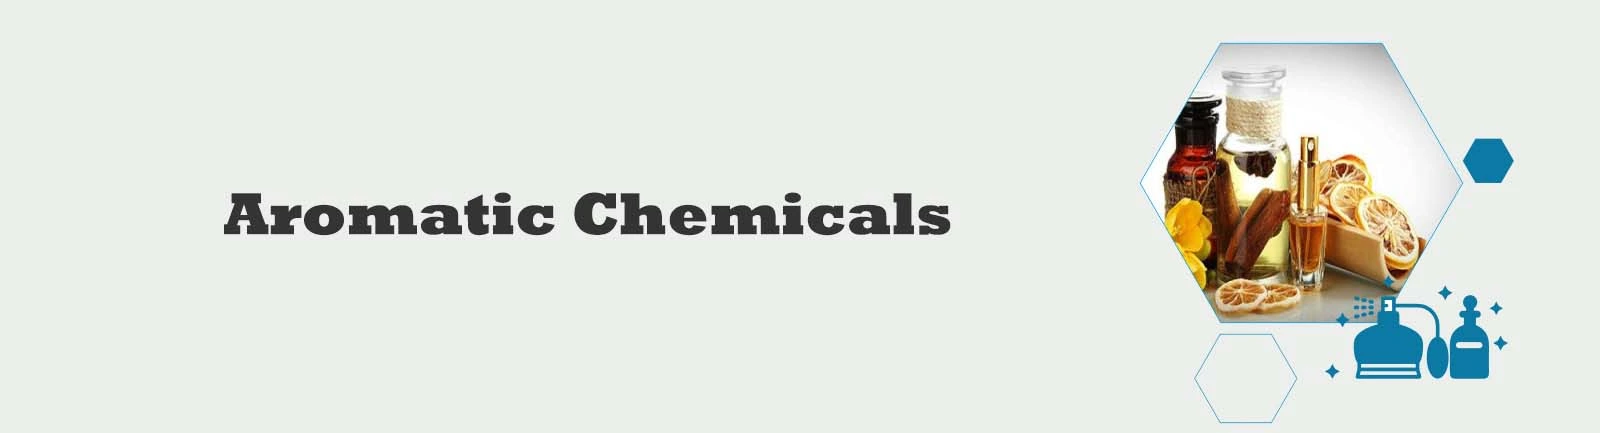 Leading distributors, suppliers, retailer of Aromatic Chemicals in Australia & India